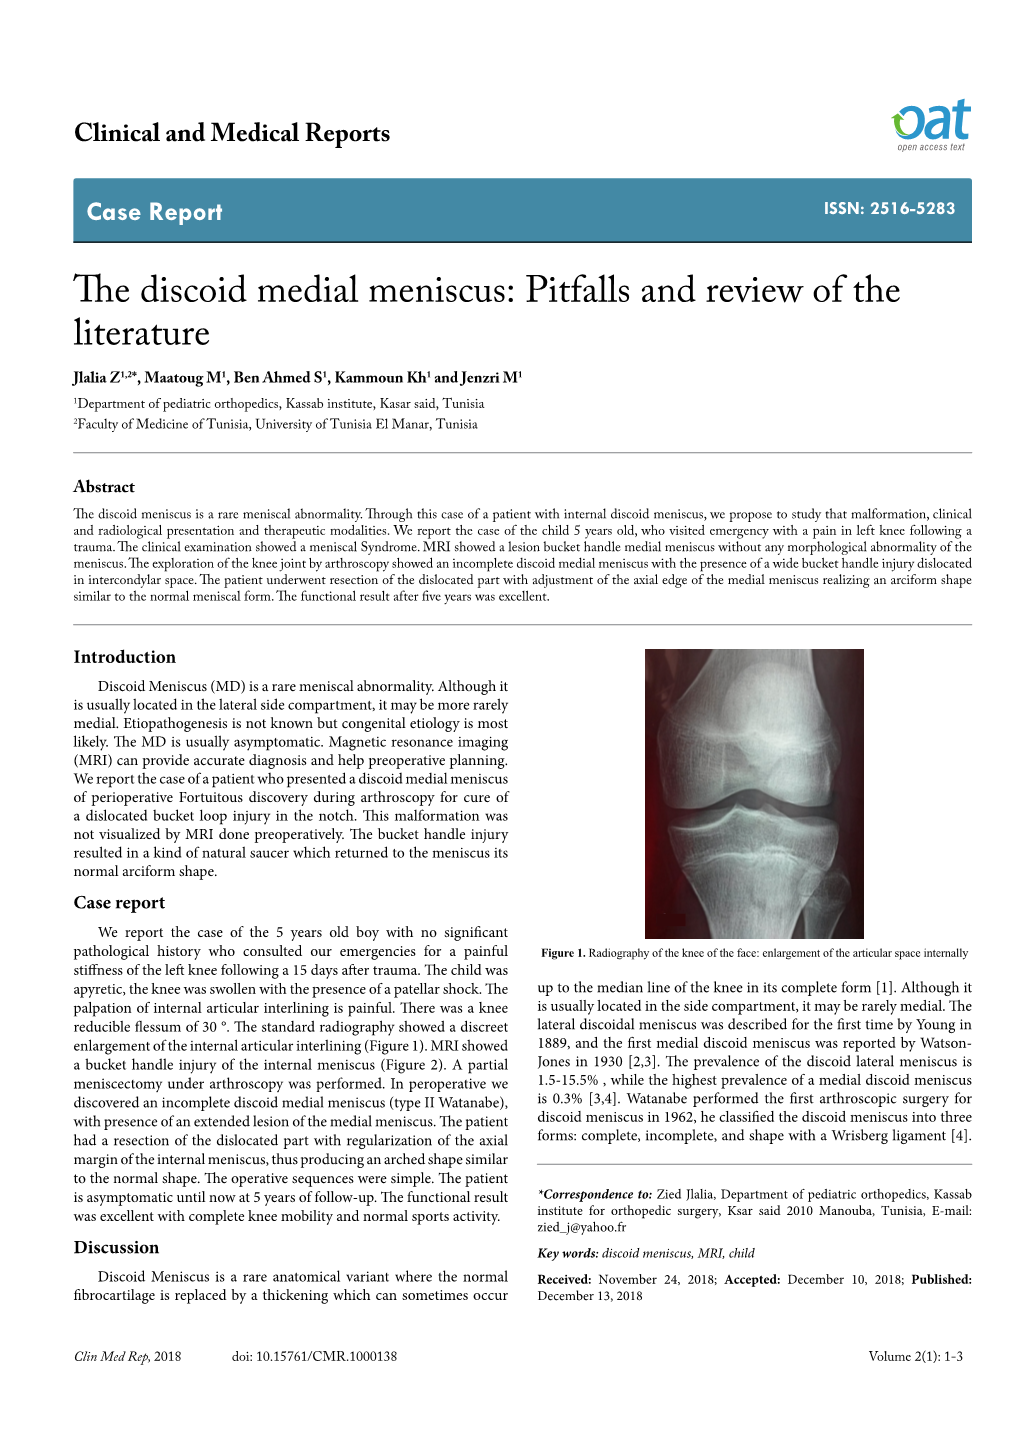 The Discoid Medial Meniscus: Pitfalls and Review of the Literature